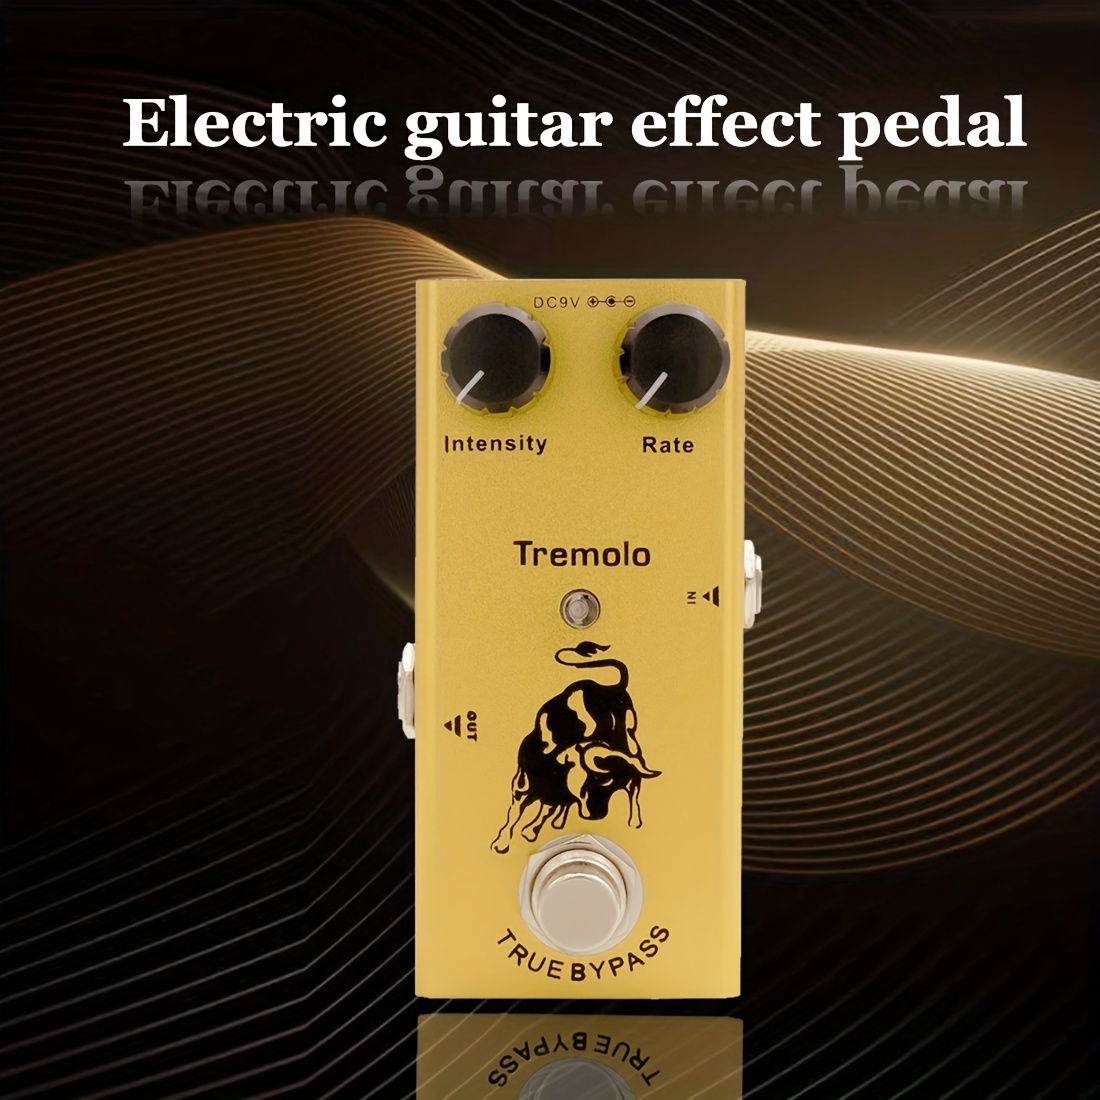 

Vintage Tremolo Electric Guitar Pedal - Mini, Portable, Aluminum Alloy With True Bypass & Low Noise - Dc 9v Powered